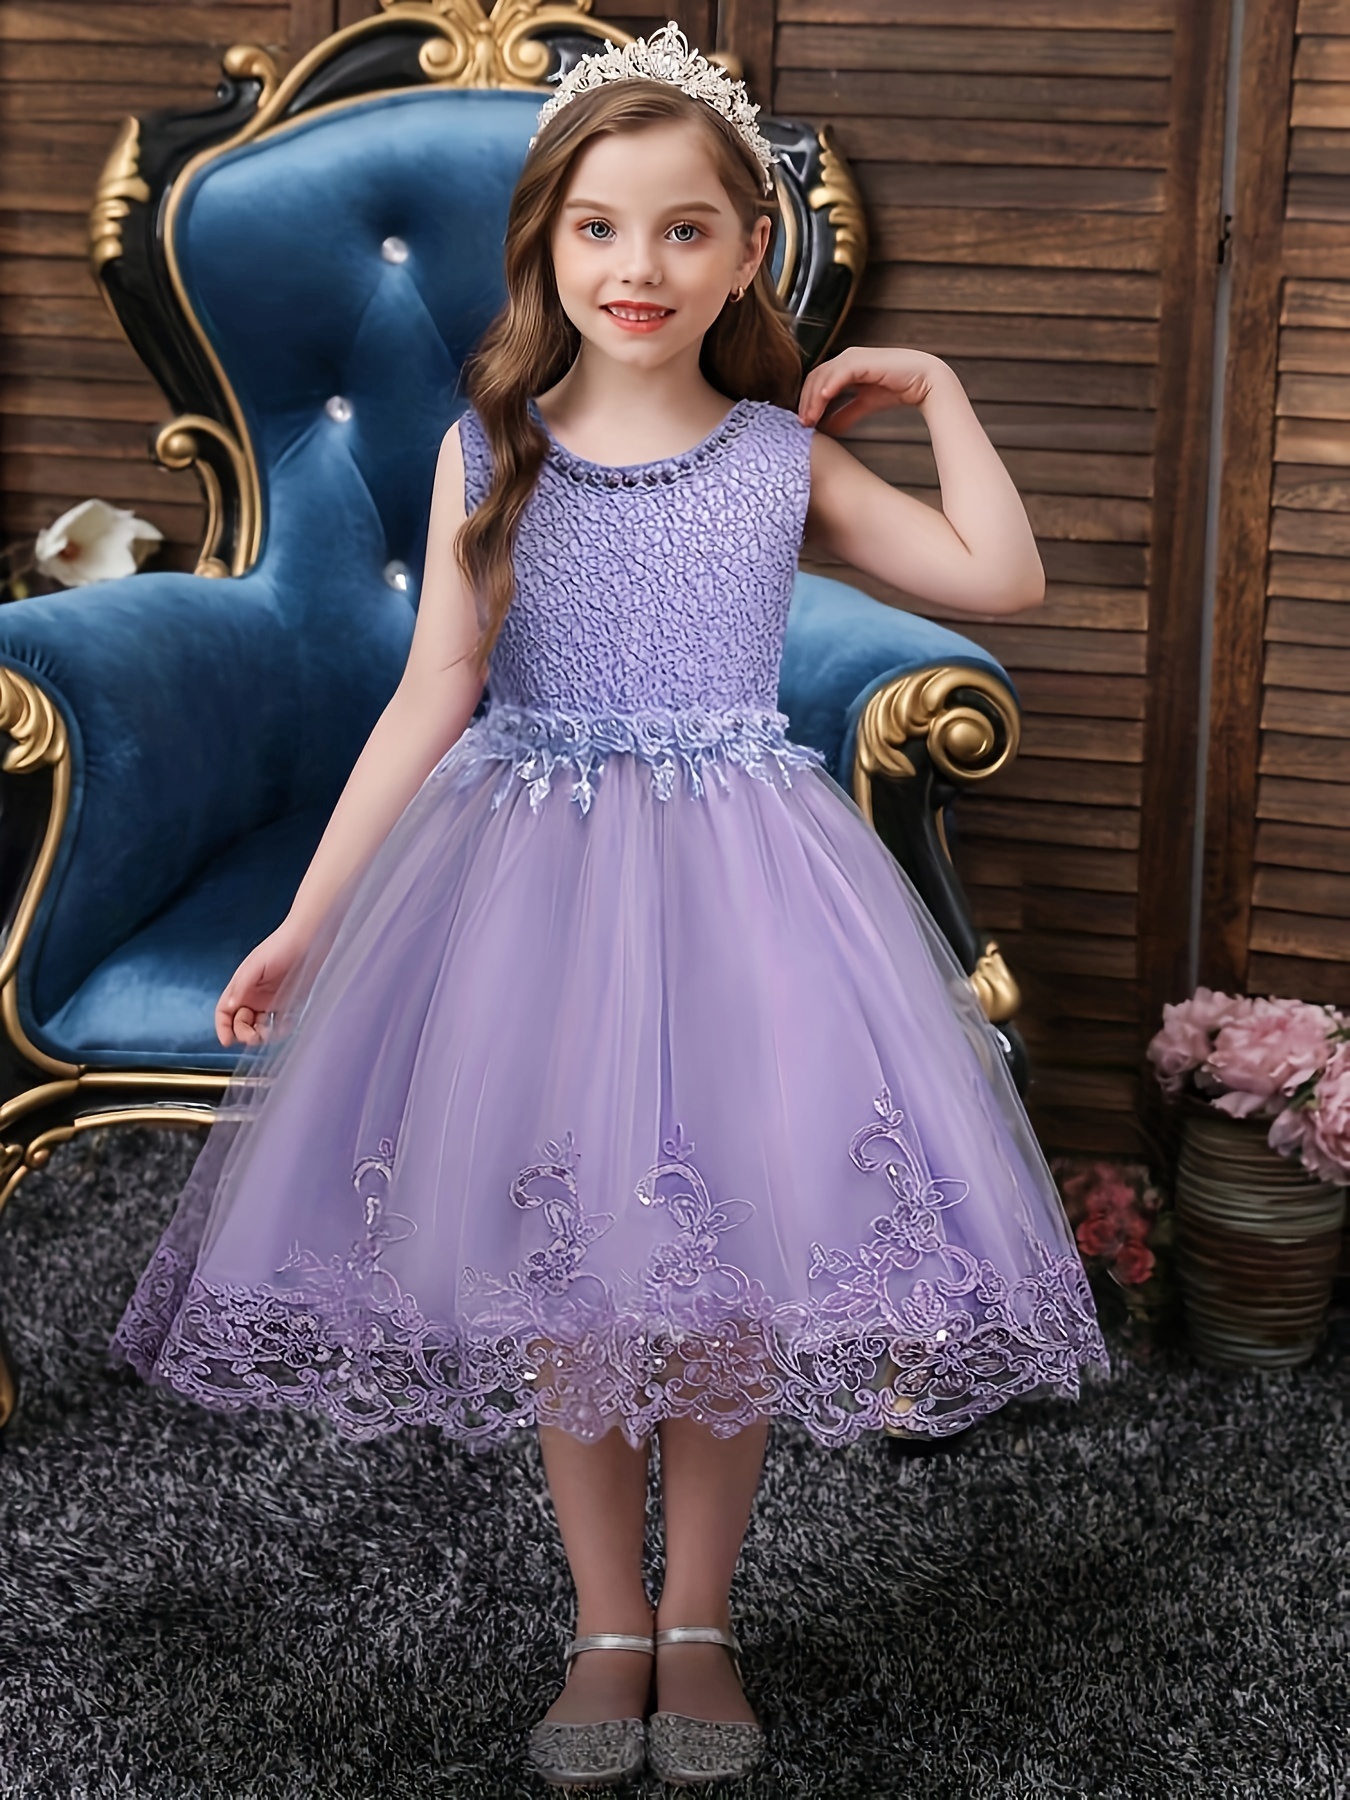 Kids Girls Dress Party Outfit Princess 12 Child 8 Strapless Ball